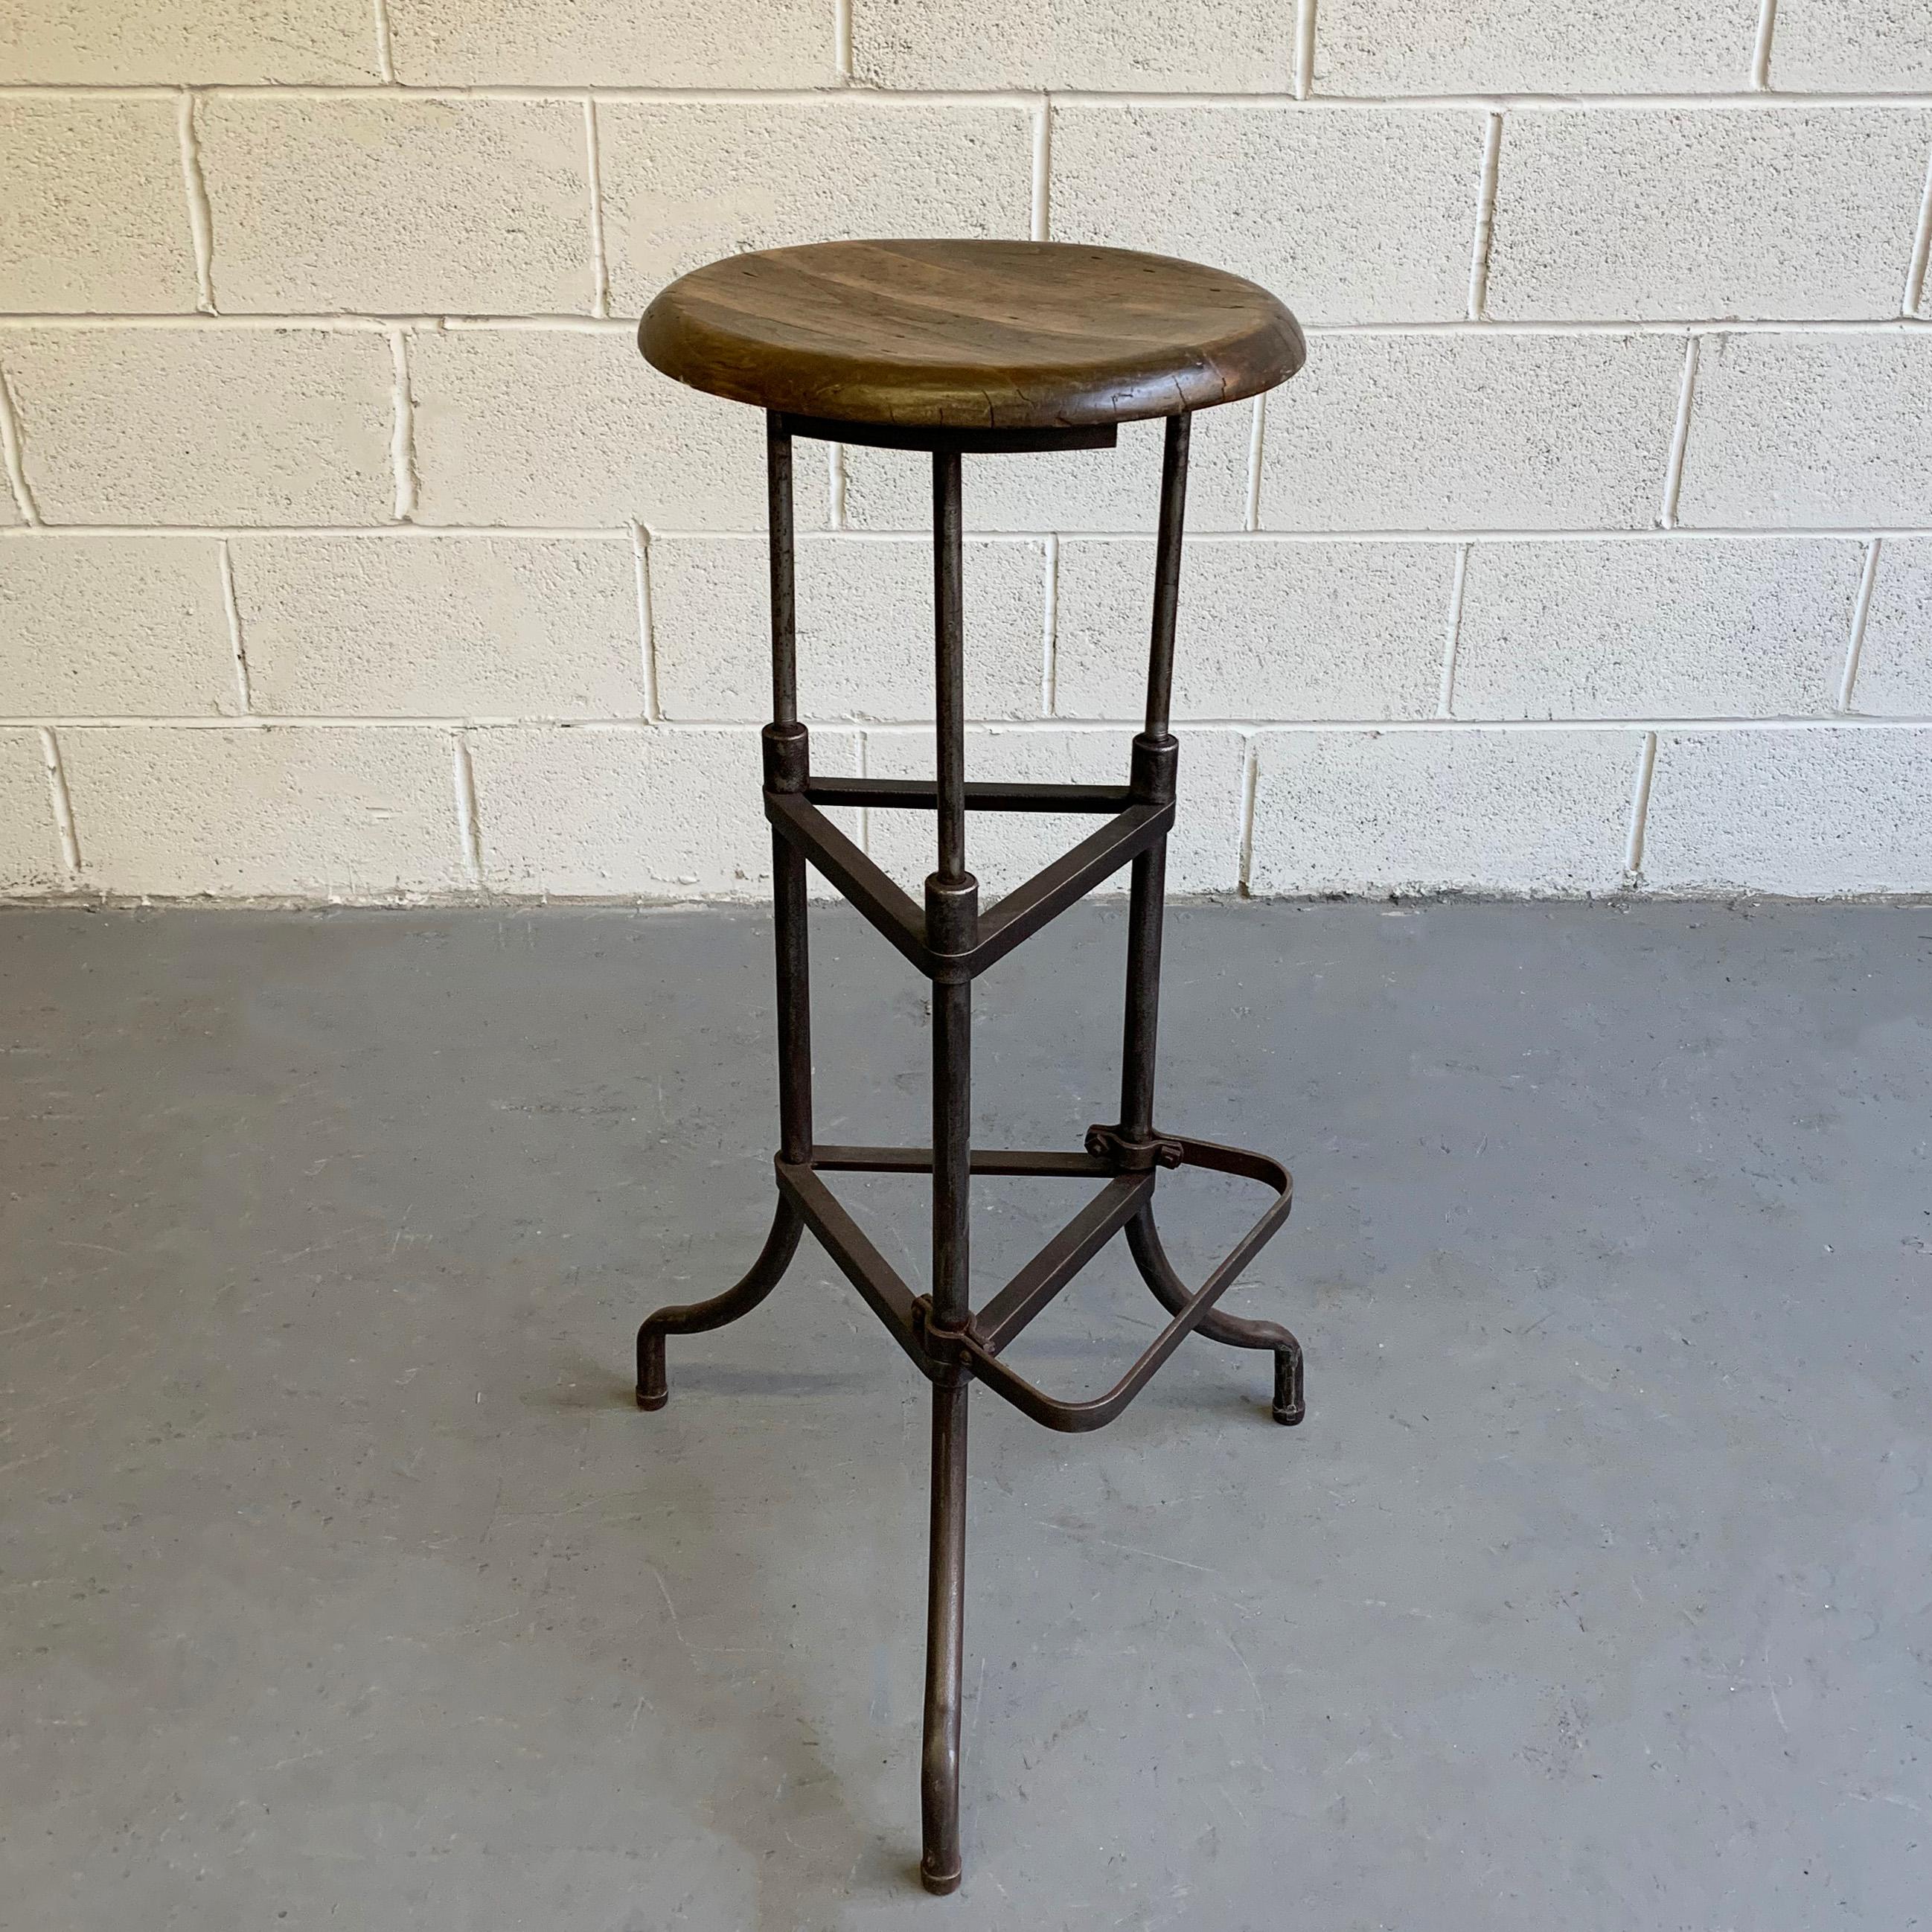 Industrial, early 20th century, drafting stool features a tripod, brushed steel base with footrest and 14 inch diameter, maple seat. Footrest is 11 inches wide and 11.5 inches from the floor.